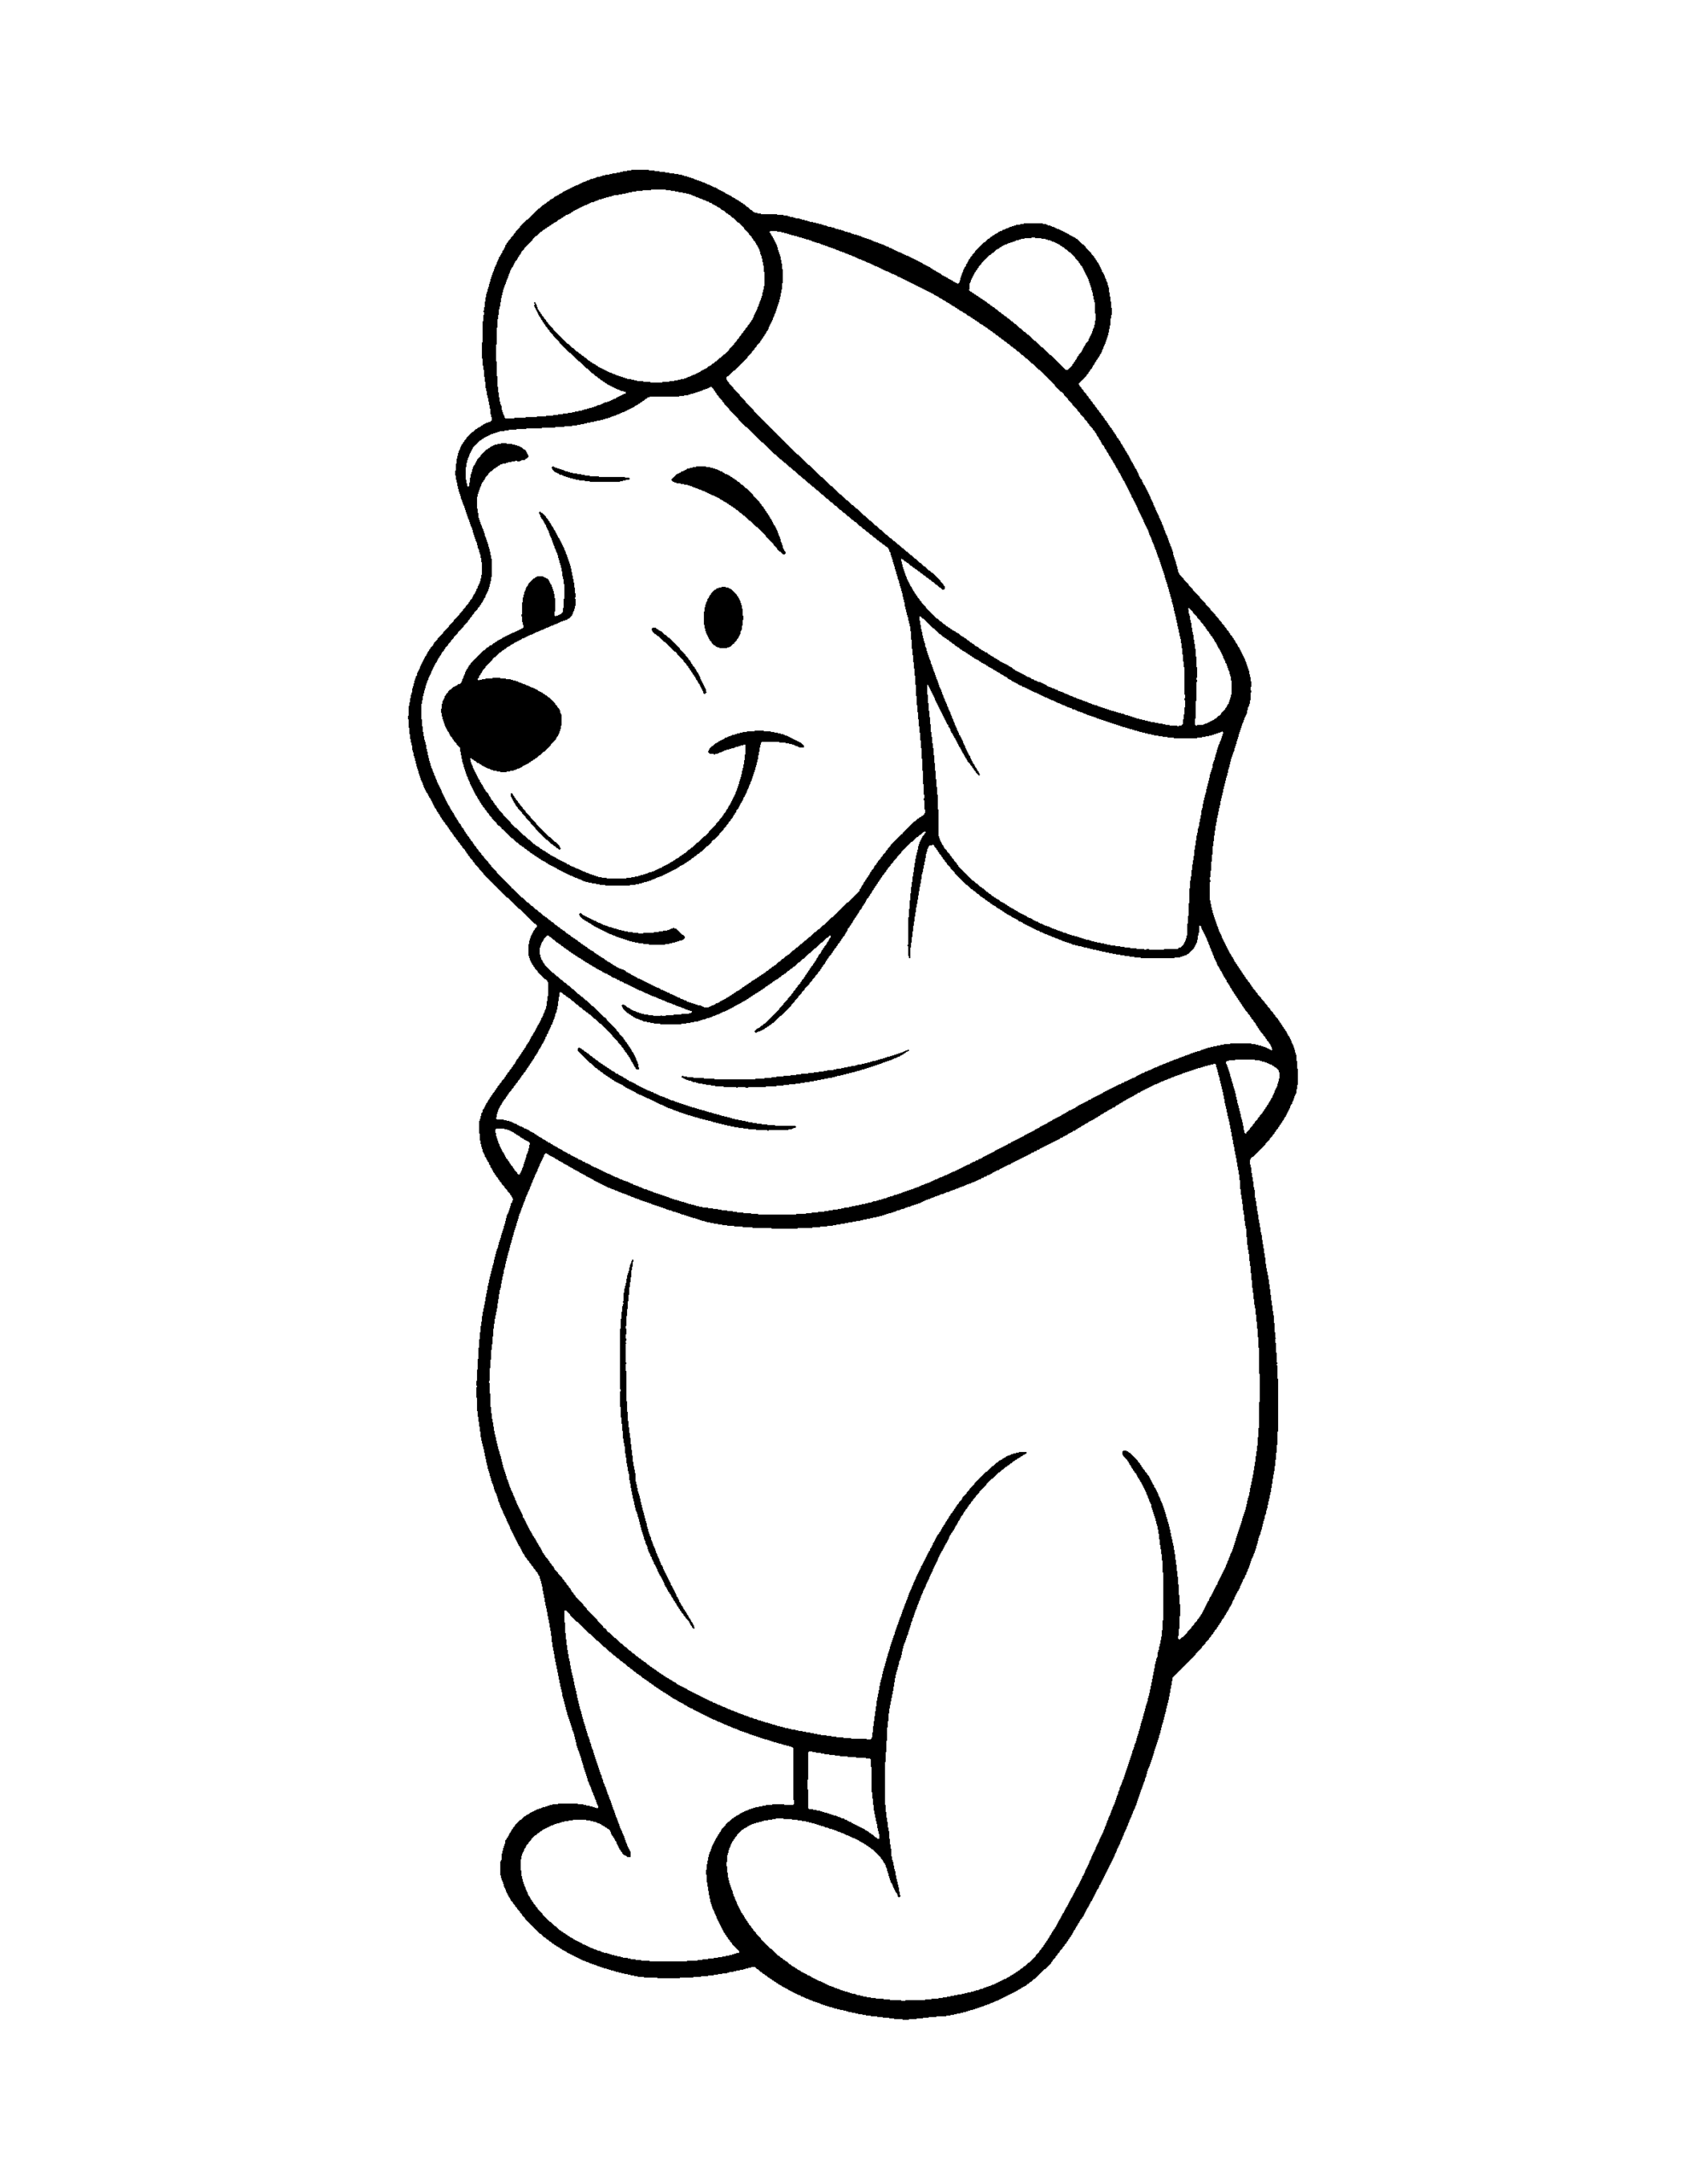 Winnie the Pooh Coloring Pages Cartoons winnie the pooh 98 Printable 2020 7221 Coloring4free